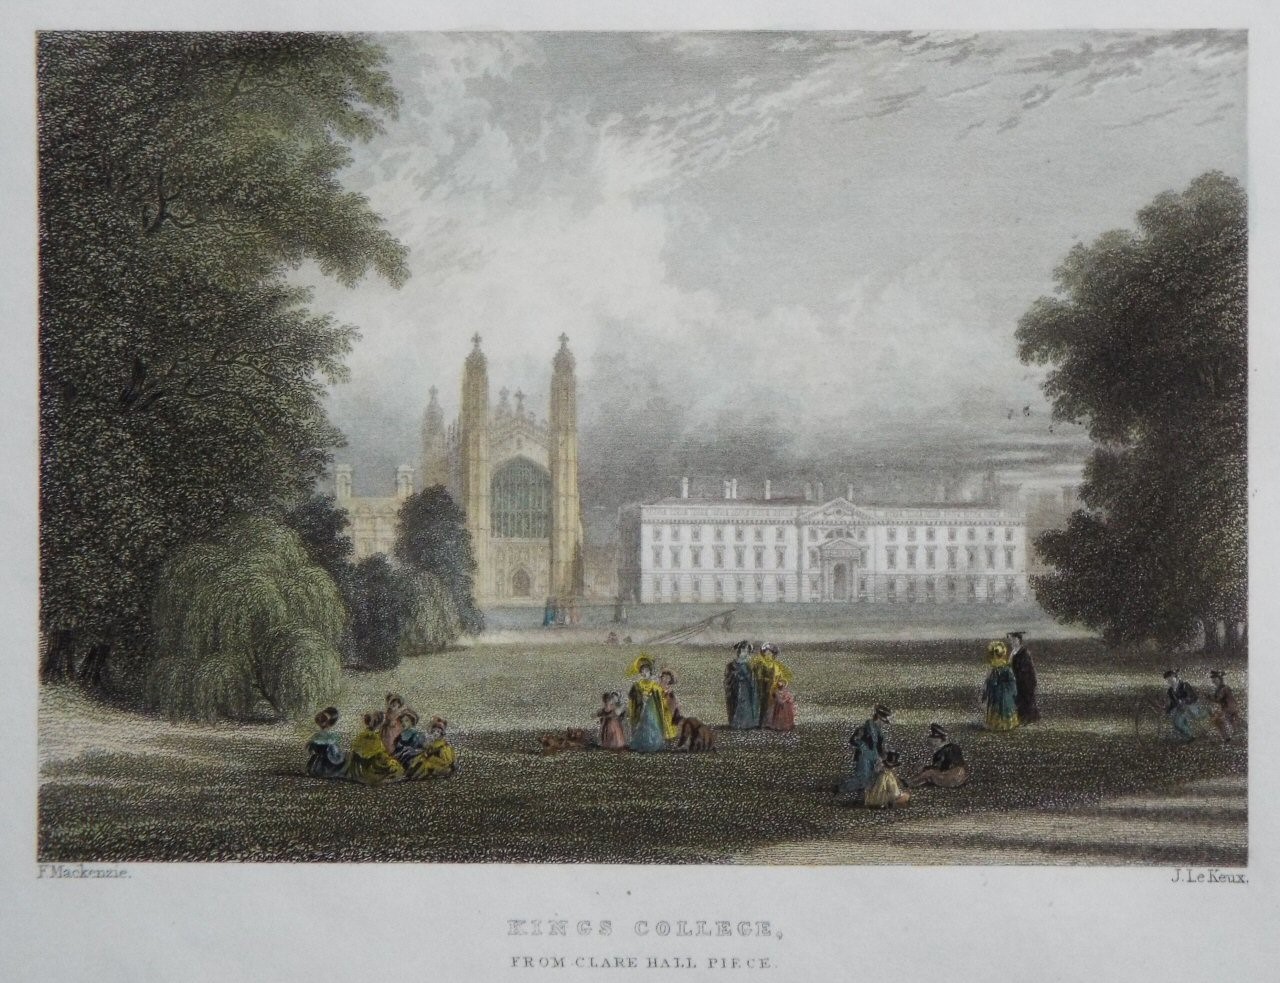 Print - Kings College, from Clare Hall Piece. - Le